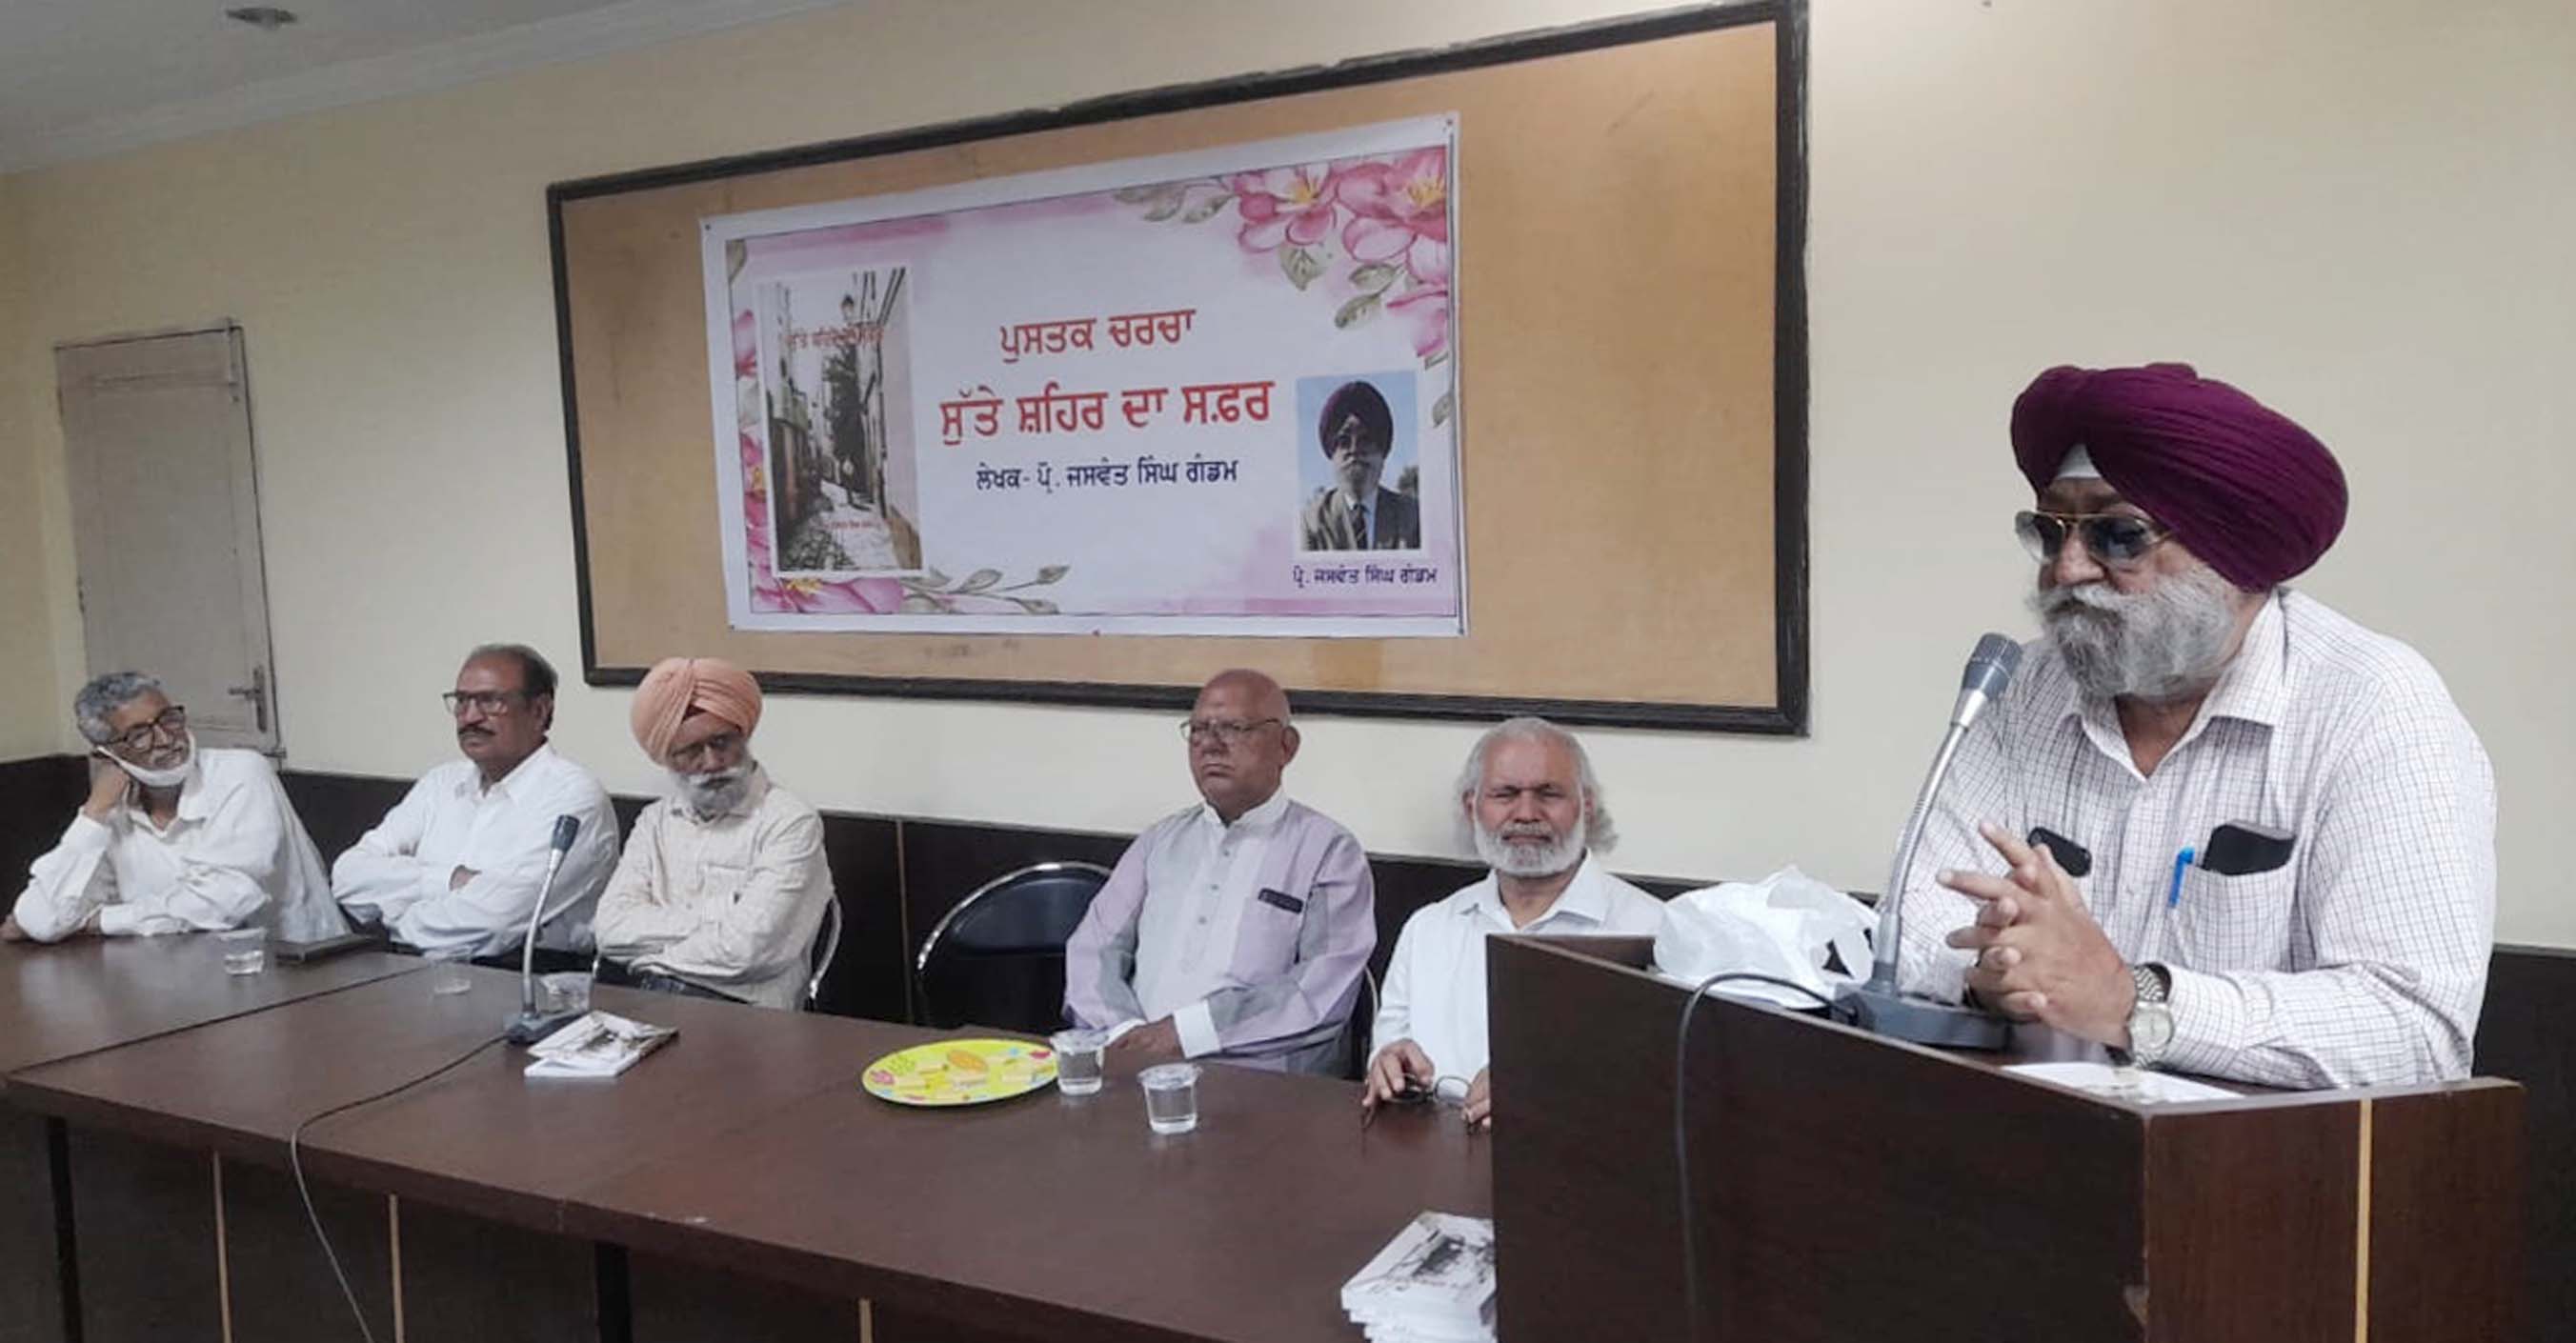 Literature mirrors society and shows mirror to it: Prof Jaswant Singh Gandam